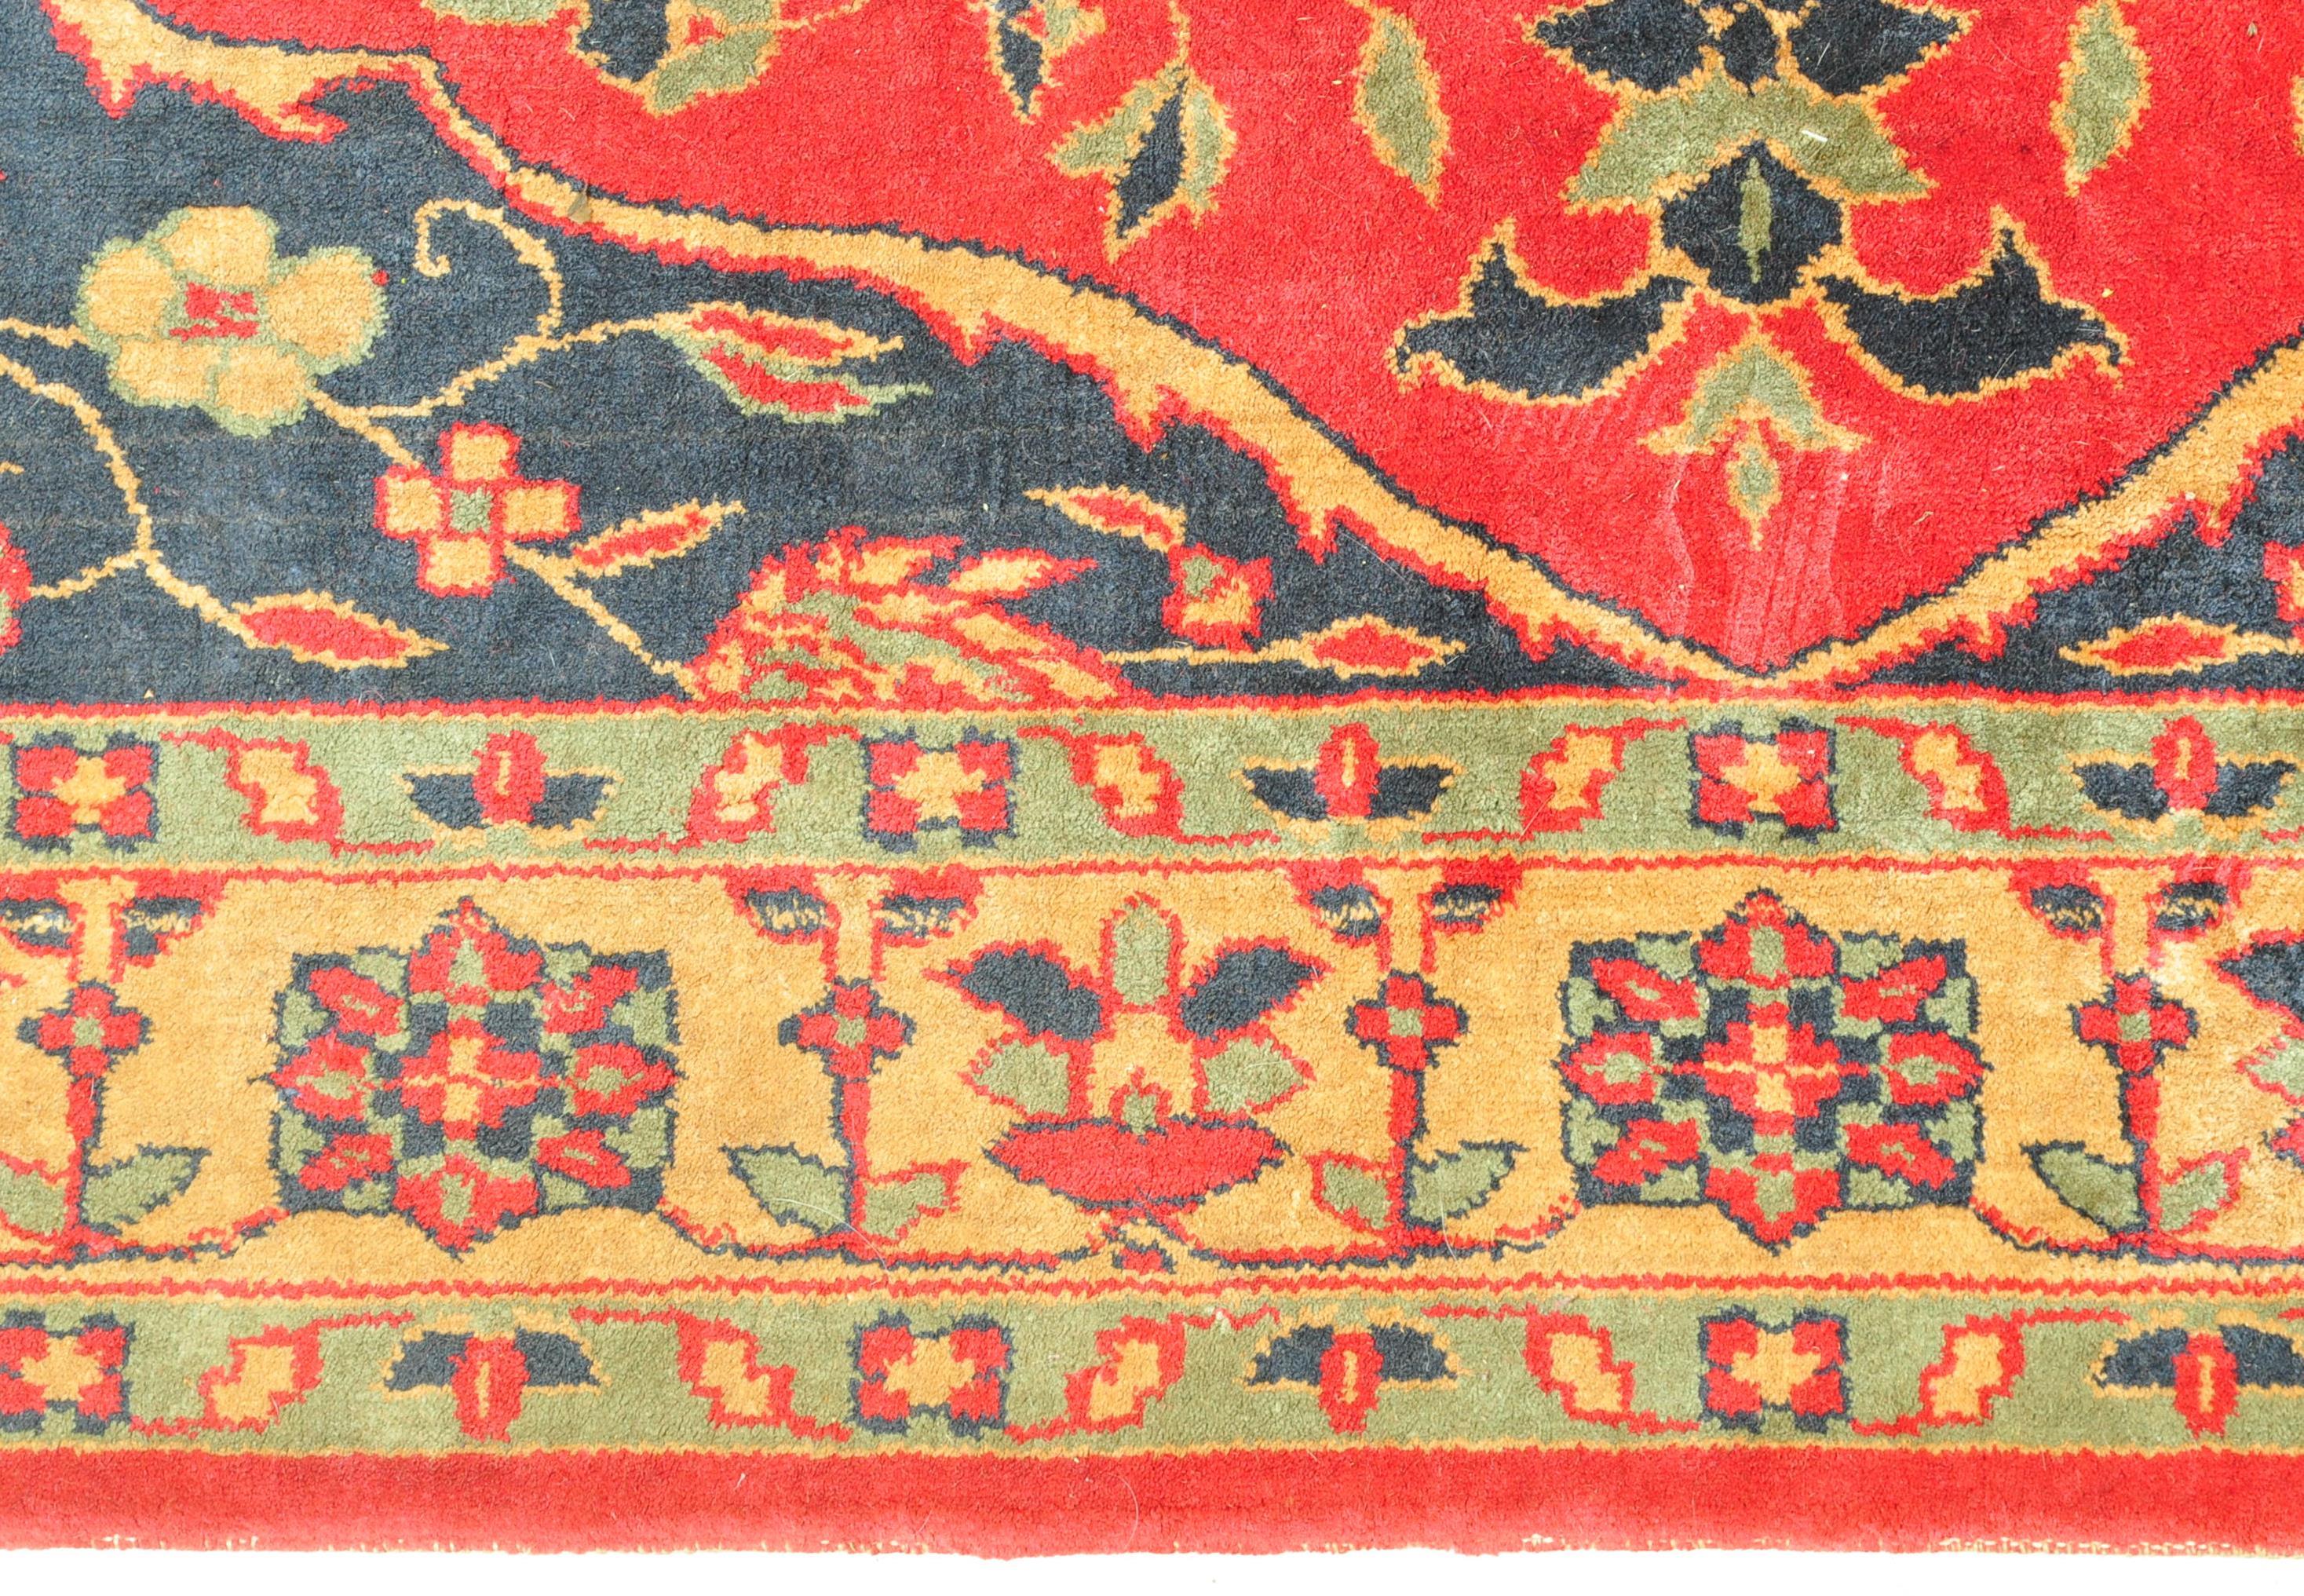 20TH CENTURY HAND KNOTTED WOOL ON WOOL PERSIAN CARPET RUG - Image 5 of 5